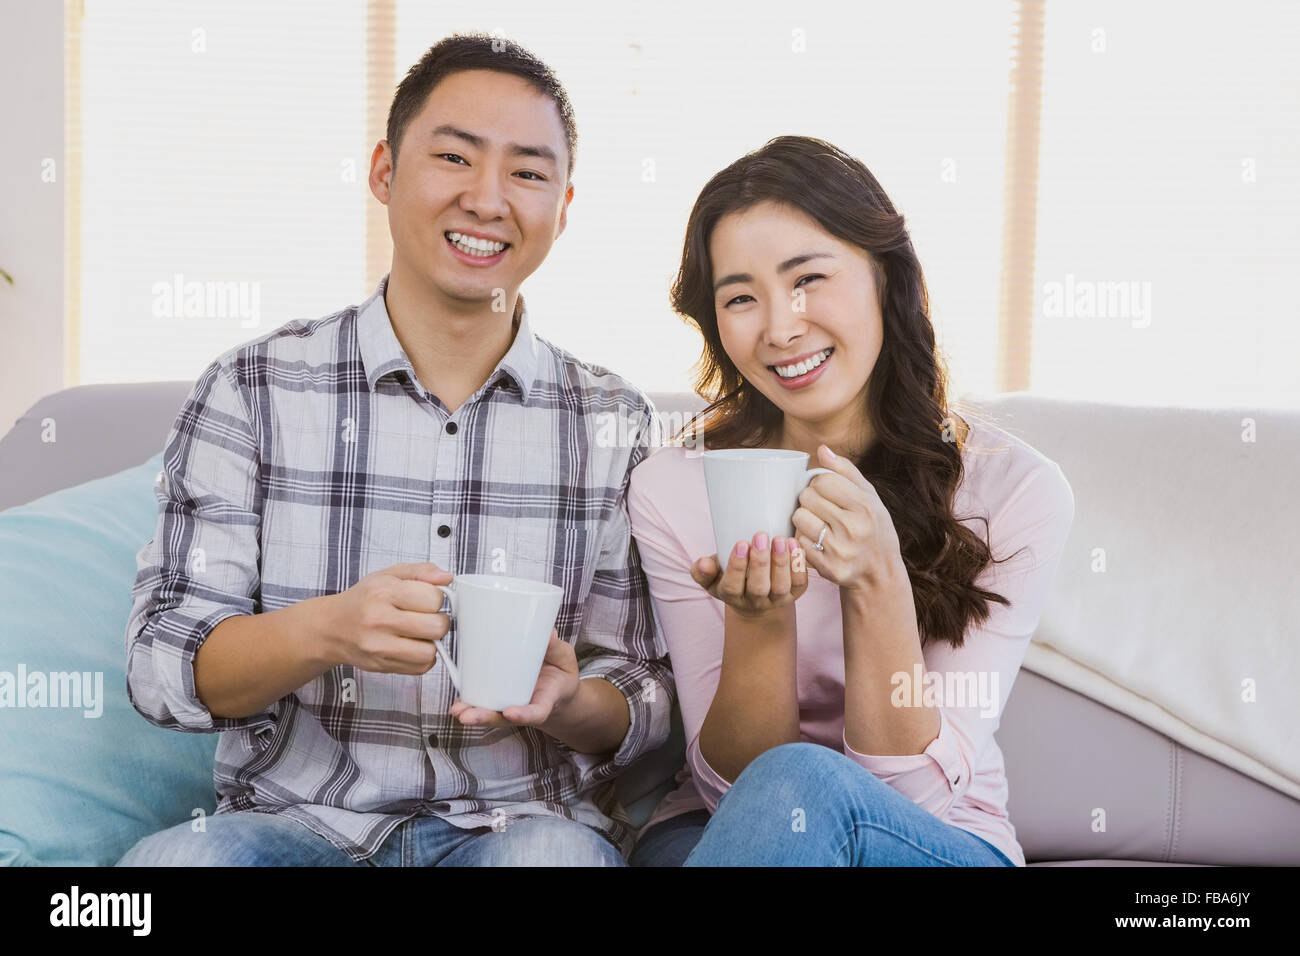 Portrait of happy couple holding Coffee cup Banque D'Images